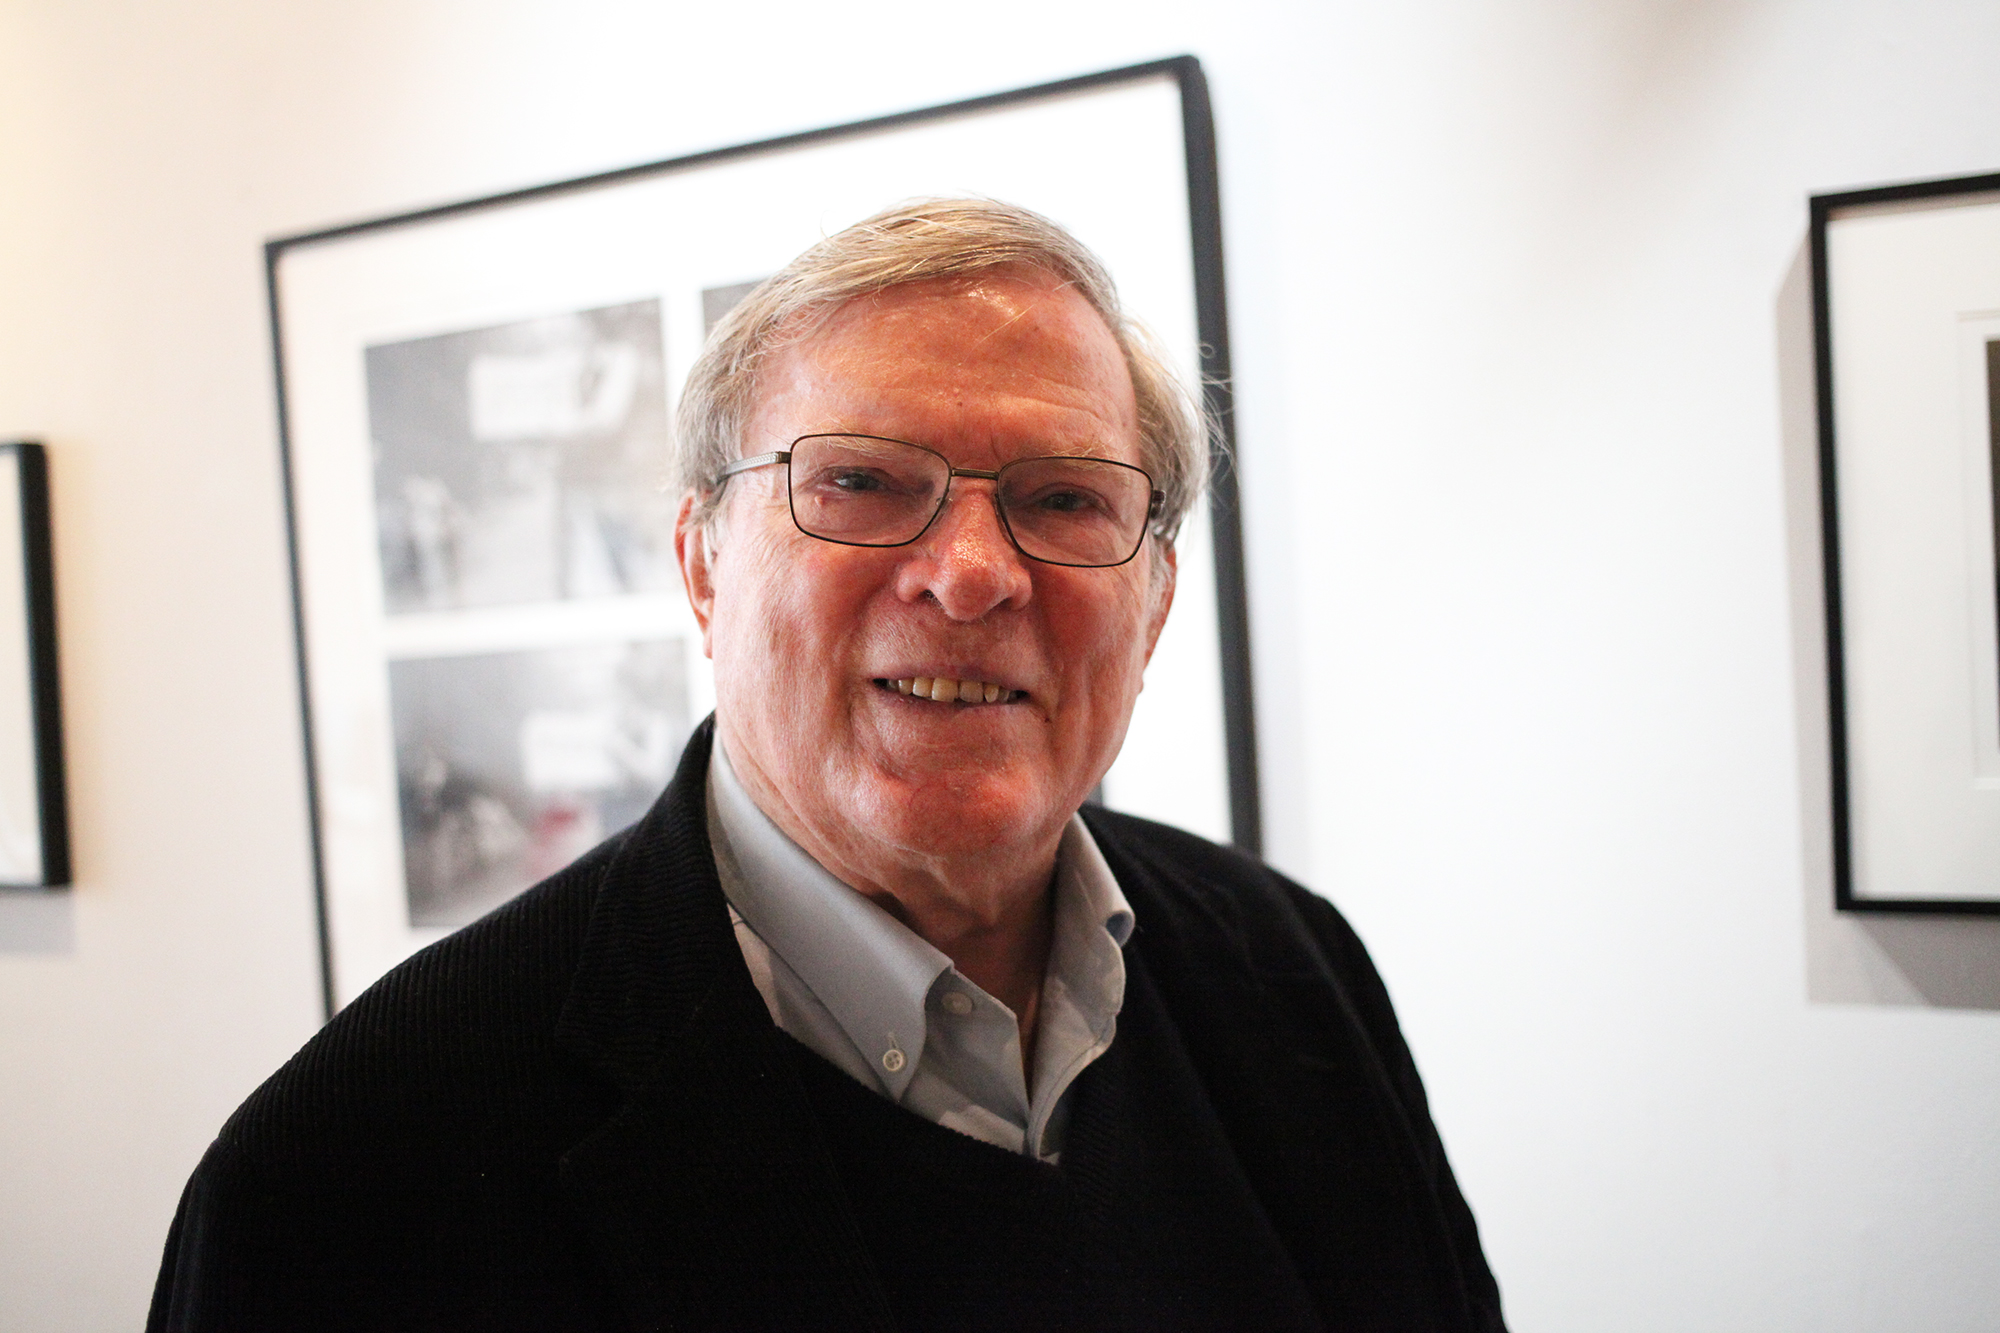 D.A. Pennebaker at the Morrison Hotel Gallery in New York City on May 19, 2016.